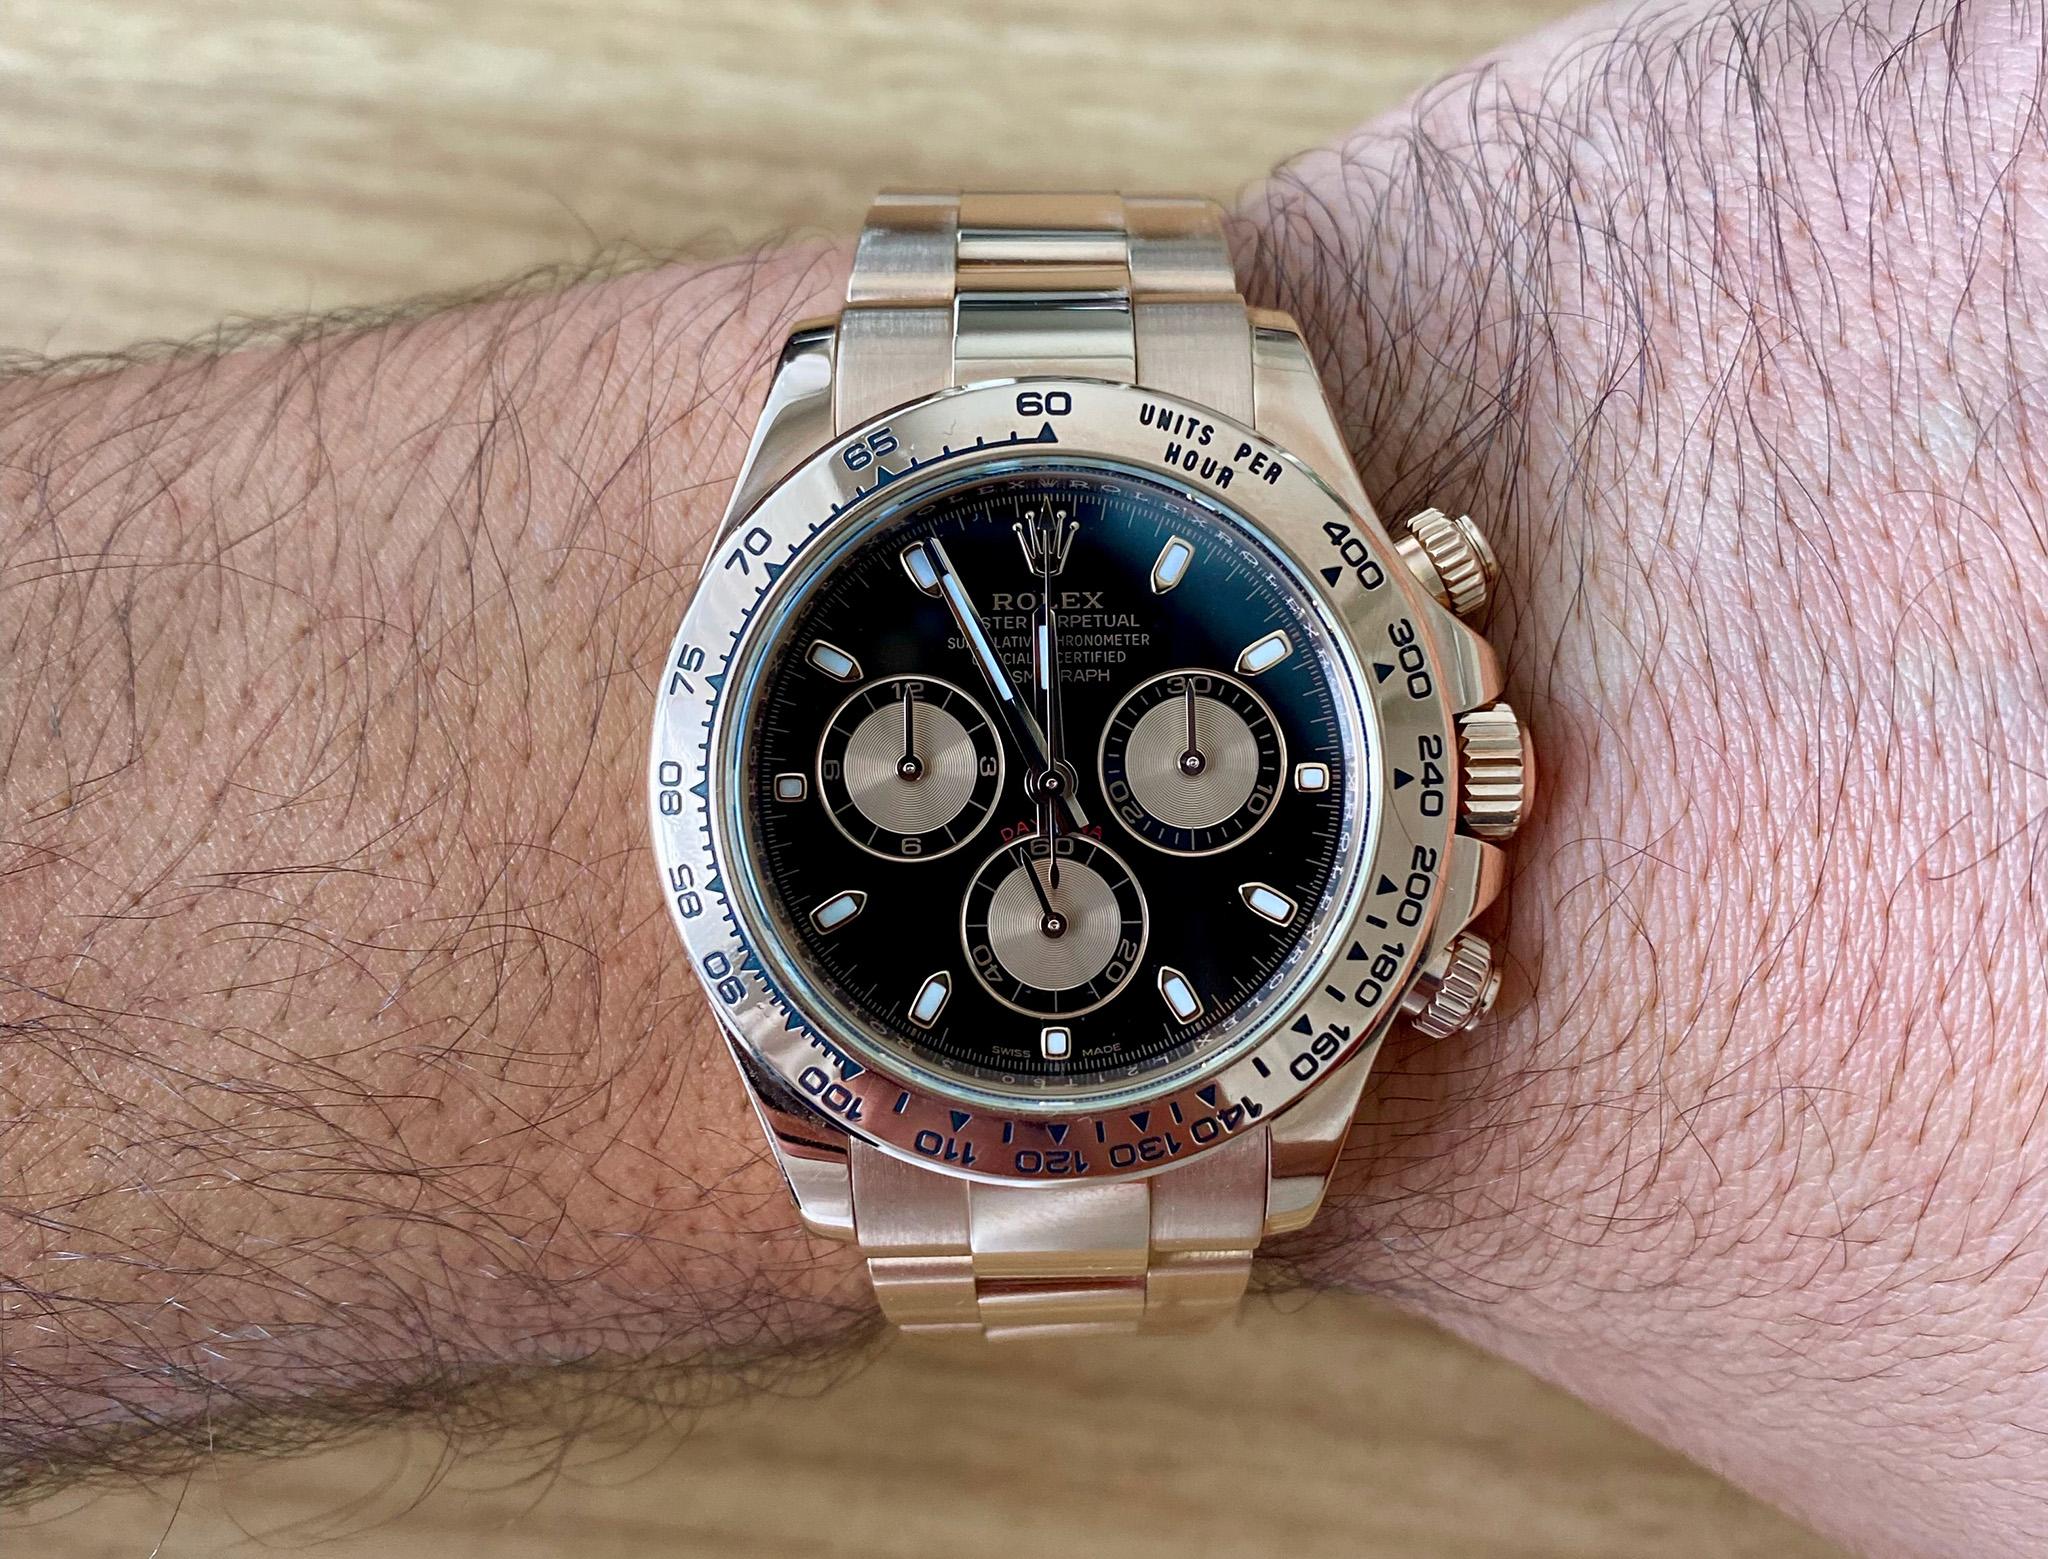 Brand: Rolex
Model: Daytona Rose Gold
Model Number: 116505
Year: 2017
It comes with the Original Box & Papers & Extra Links